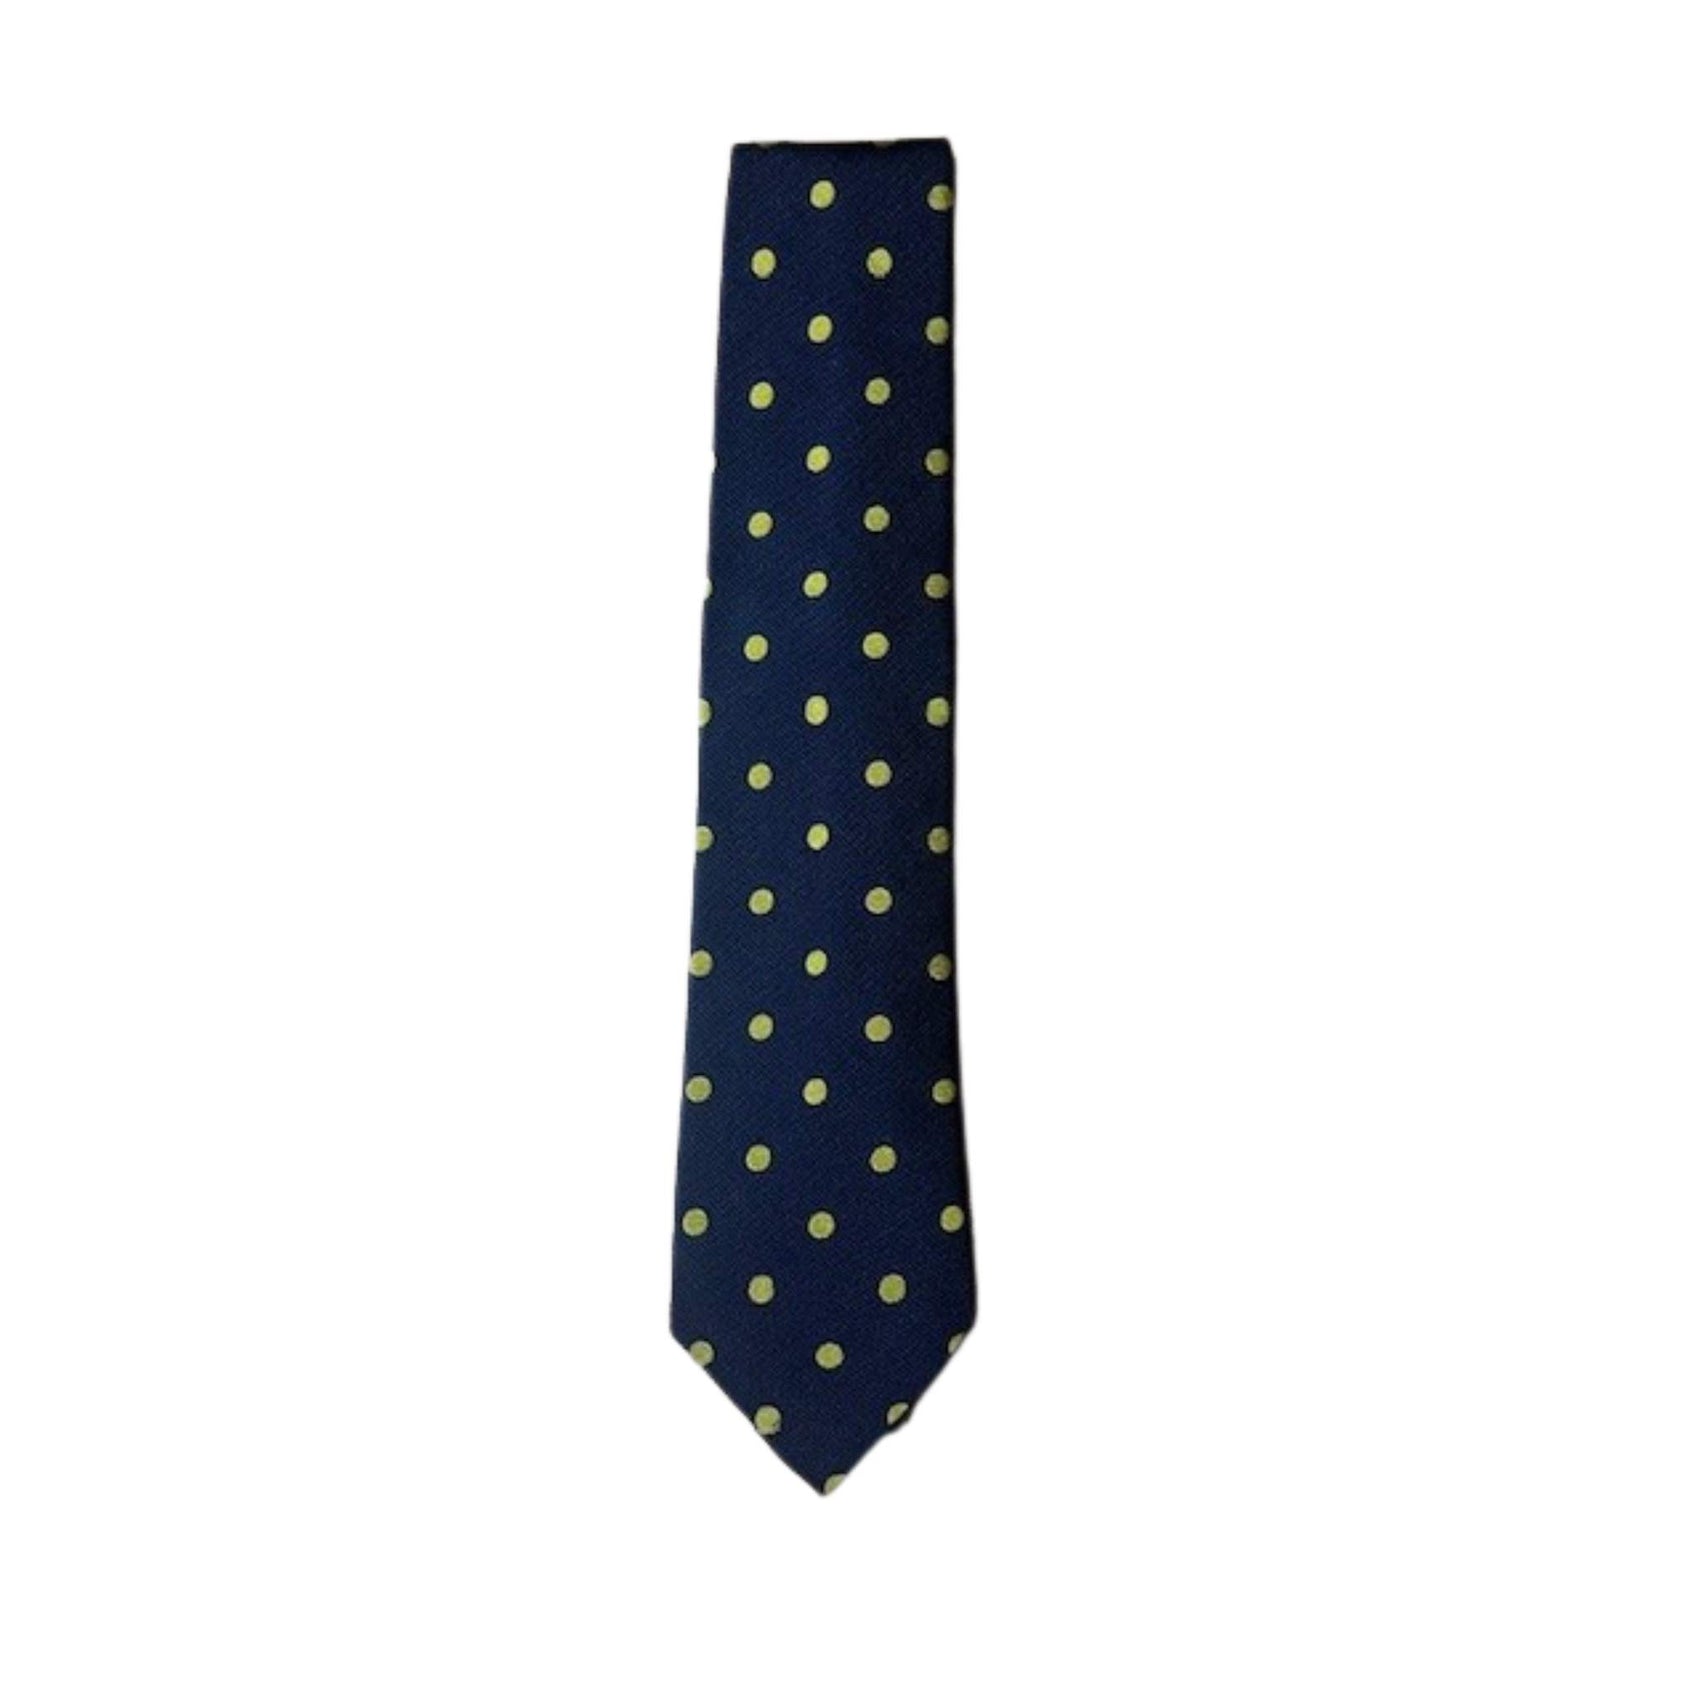 Navy and Yellow spot tie